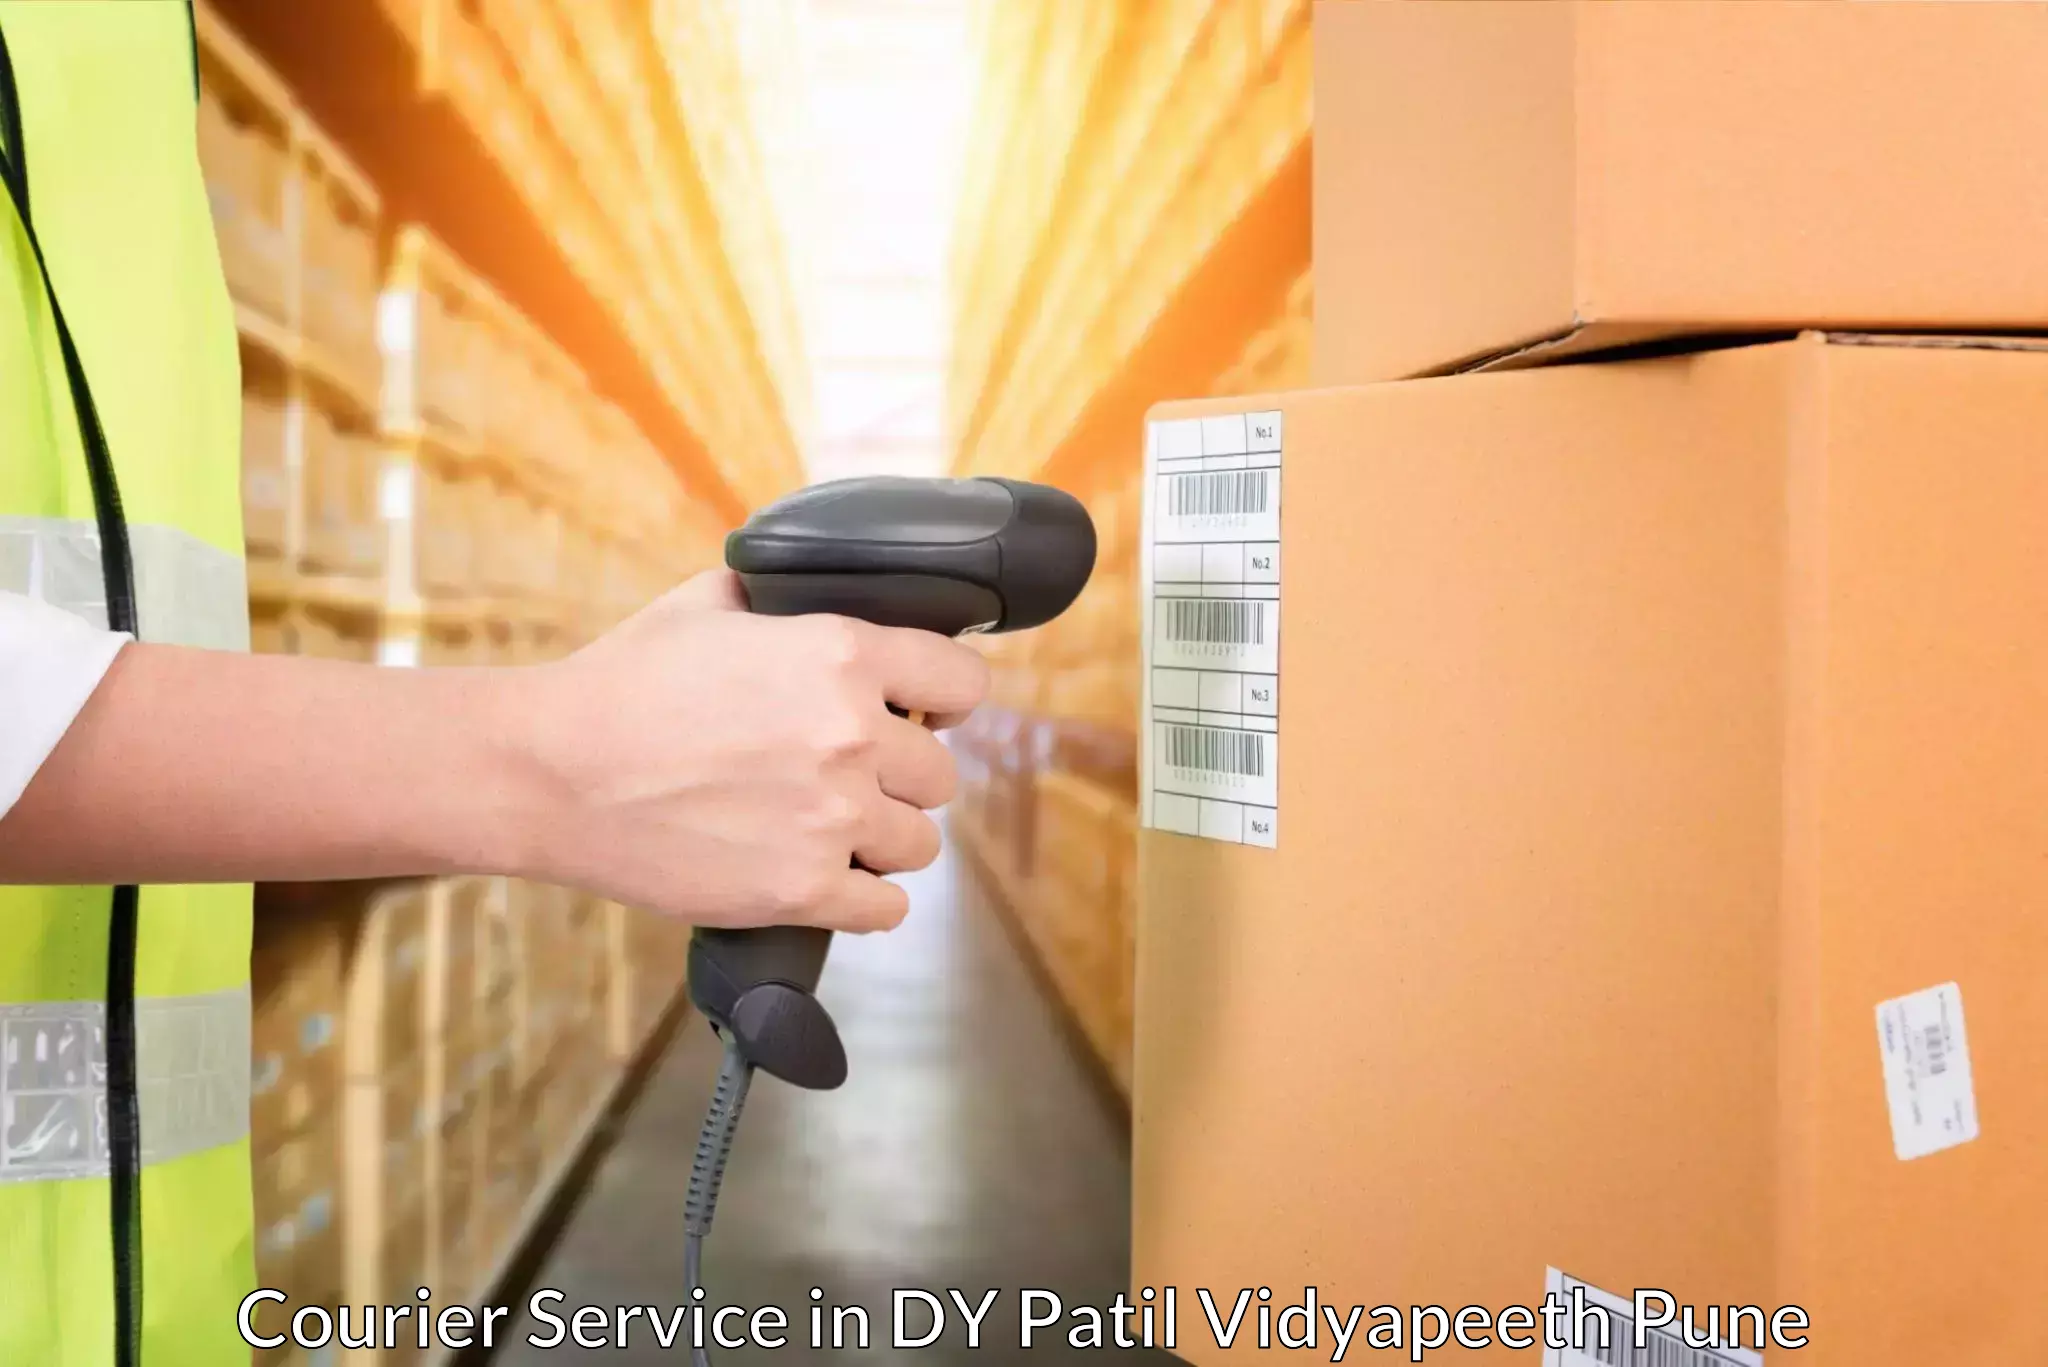 Express delivery solutions in DY Patil Vidyapeeth Pune